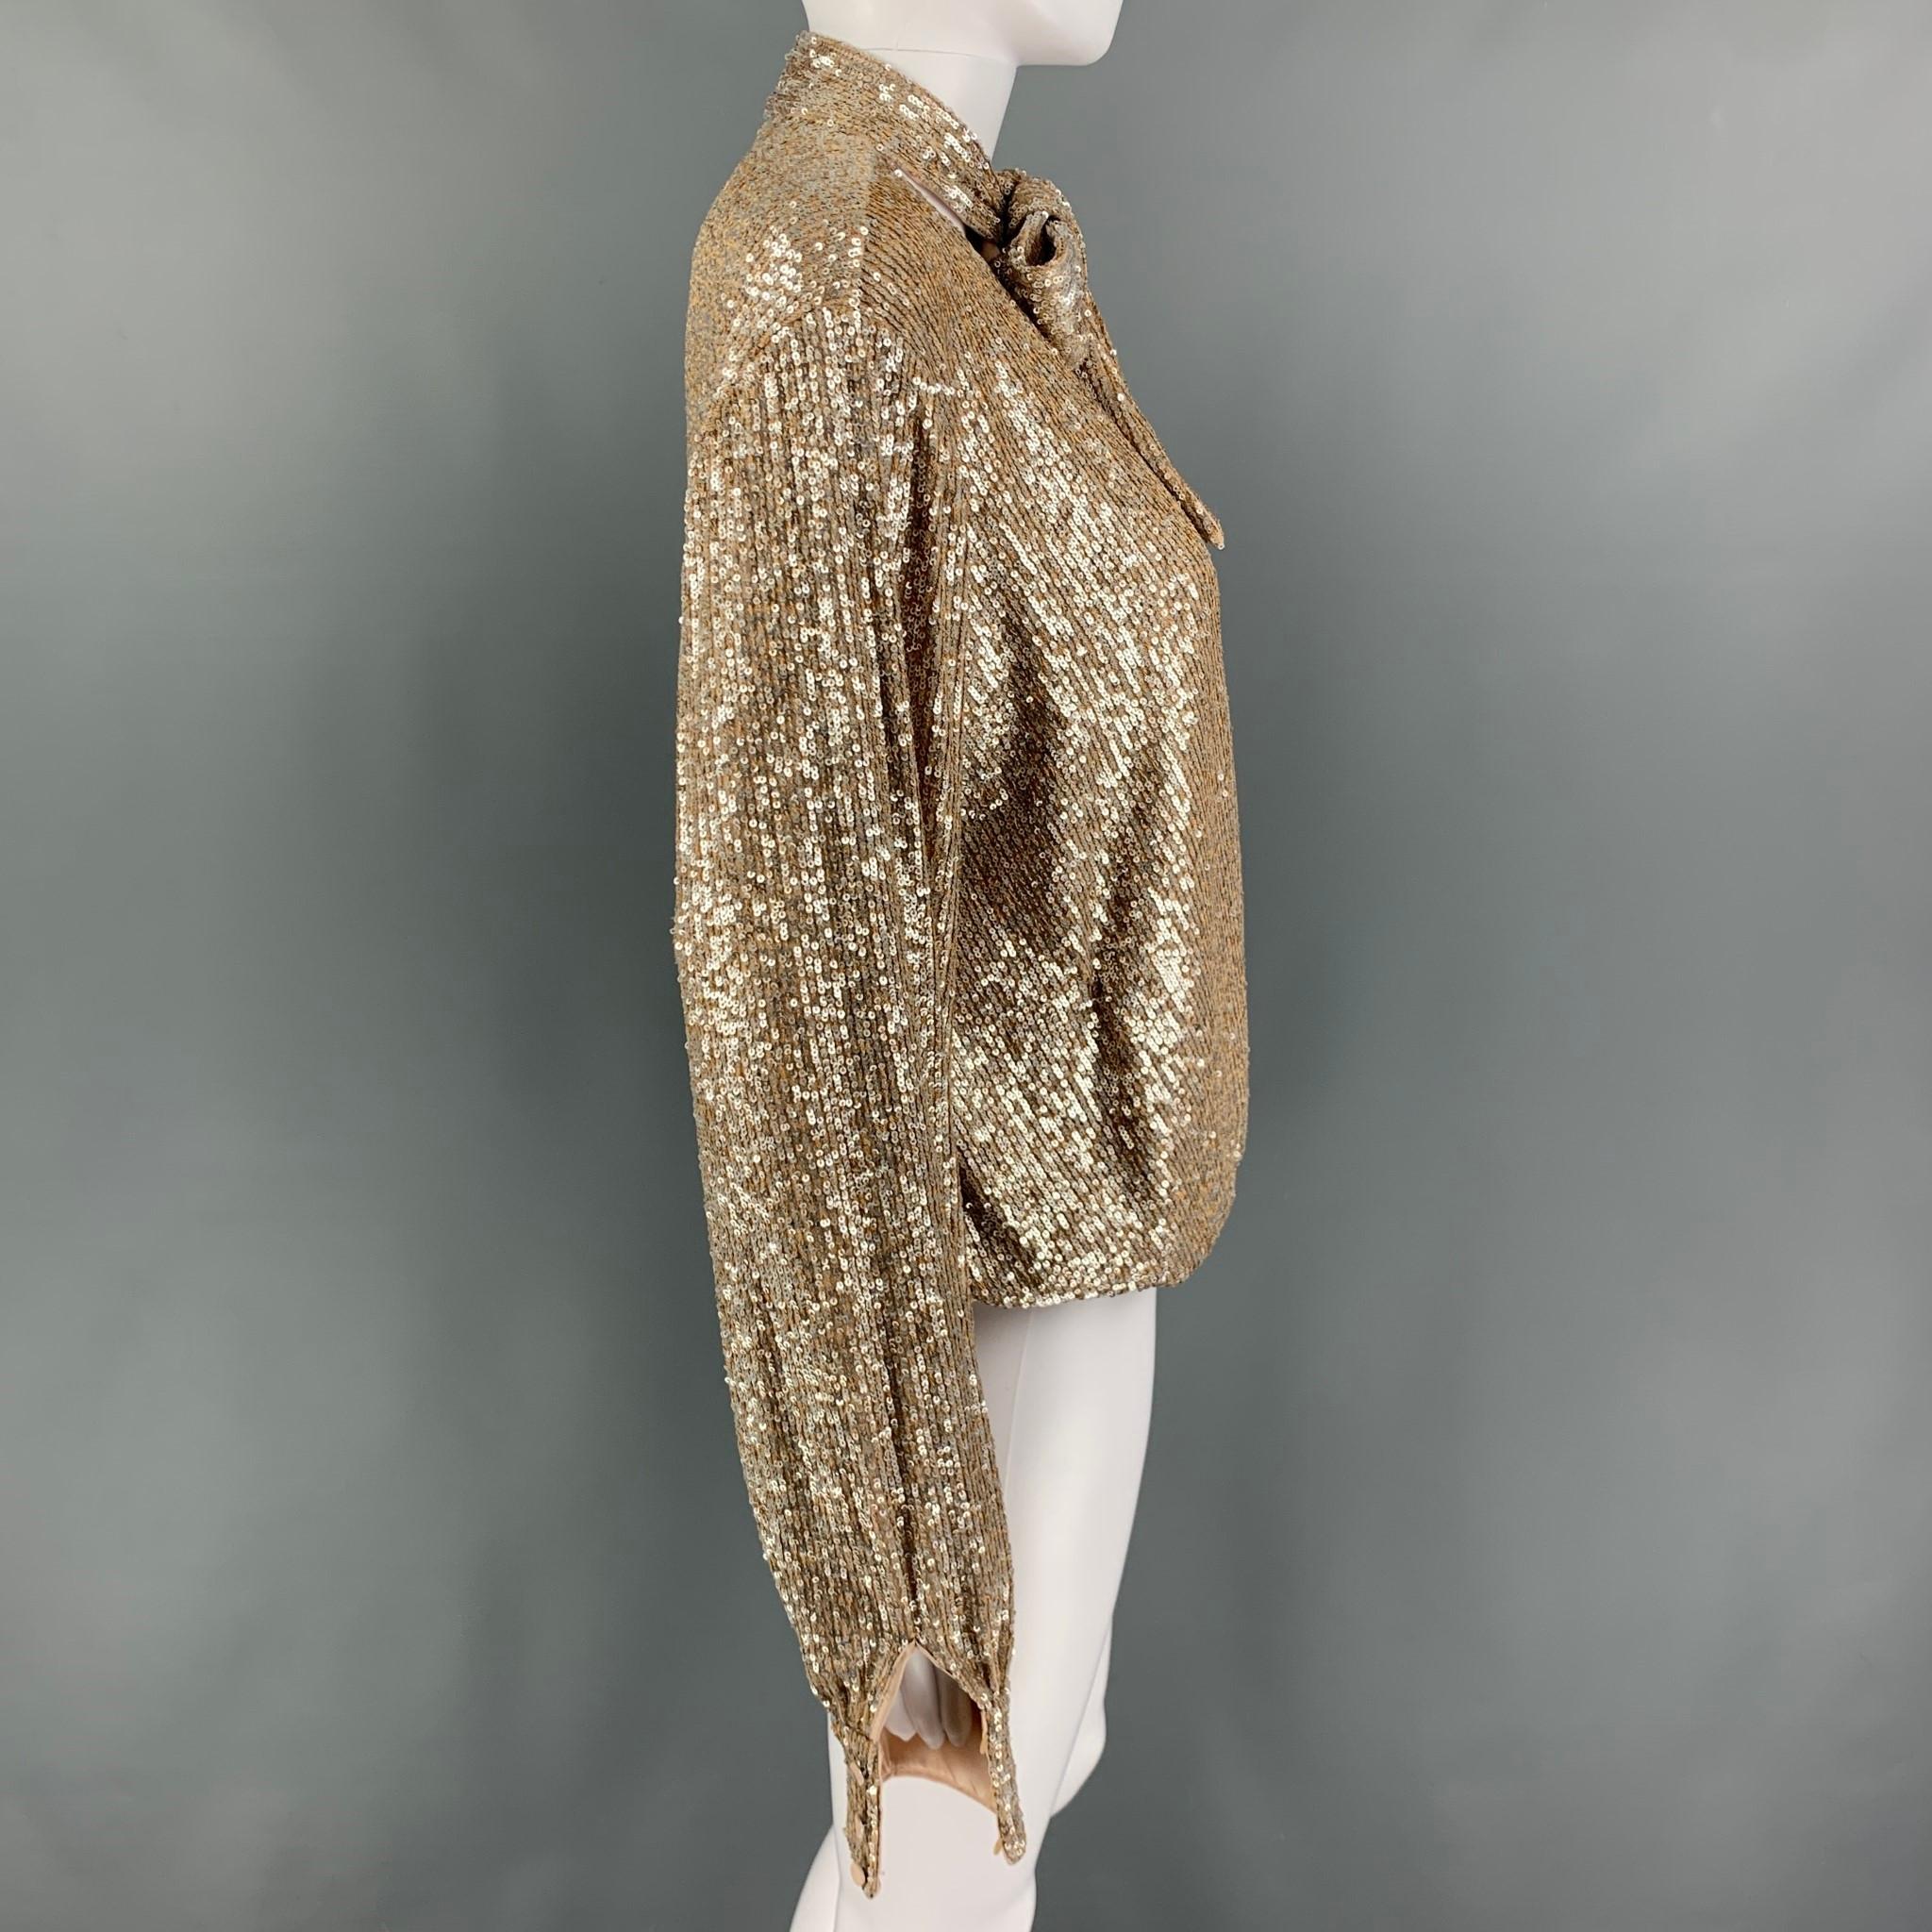 JONATHAN SIMKHAI bodysuit comes in a champagne sequined polyester featuring a open front, long sleeves, front bow design, and a hook & loop closure. 

New with tags. 
Marked: L

Measurements:
 
Shoulder: 17 in.
Bust: 40 in.
Sleeve: 28 in.
Length: 22